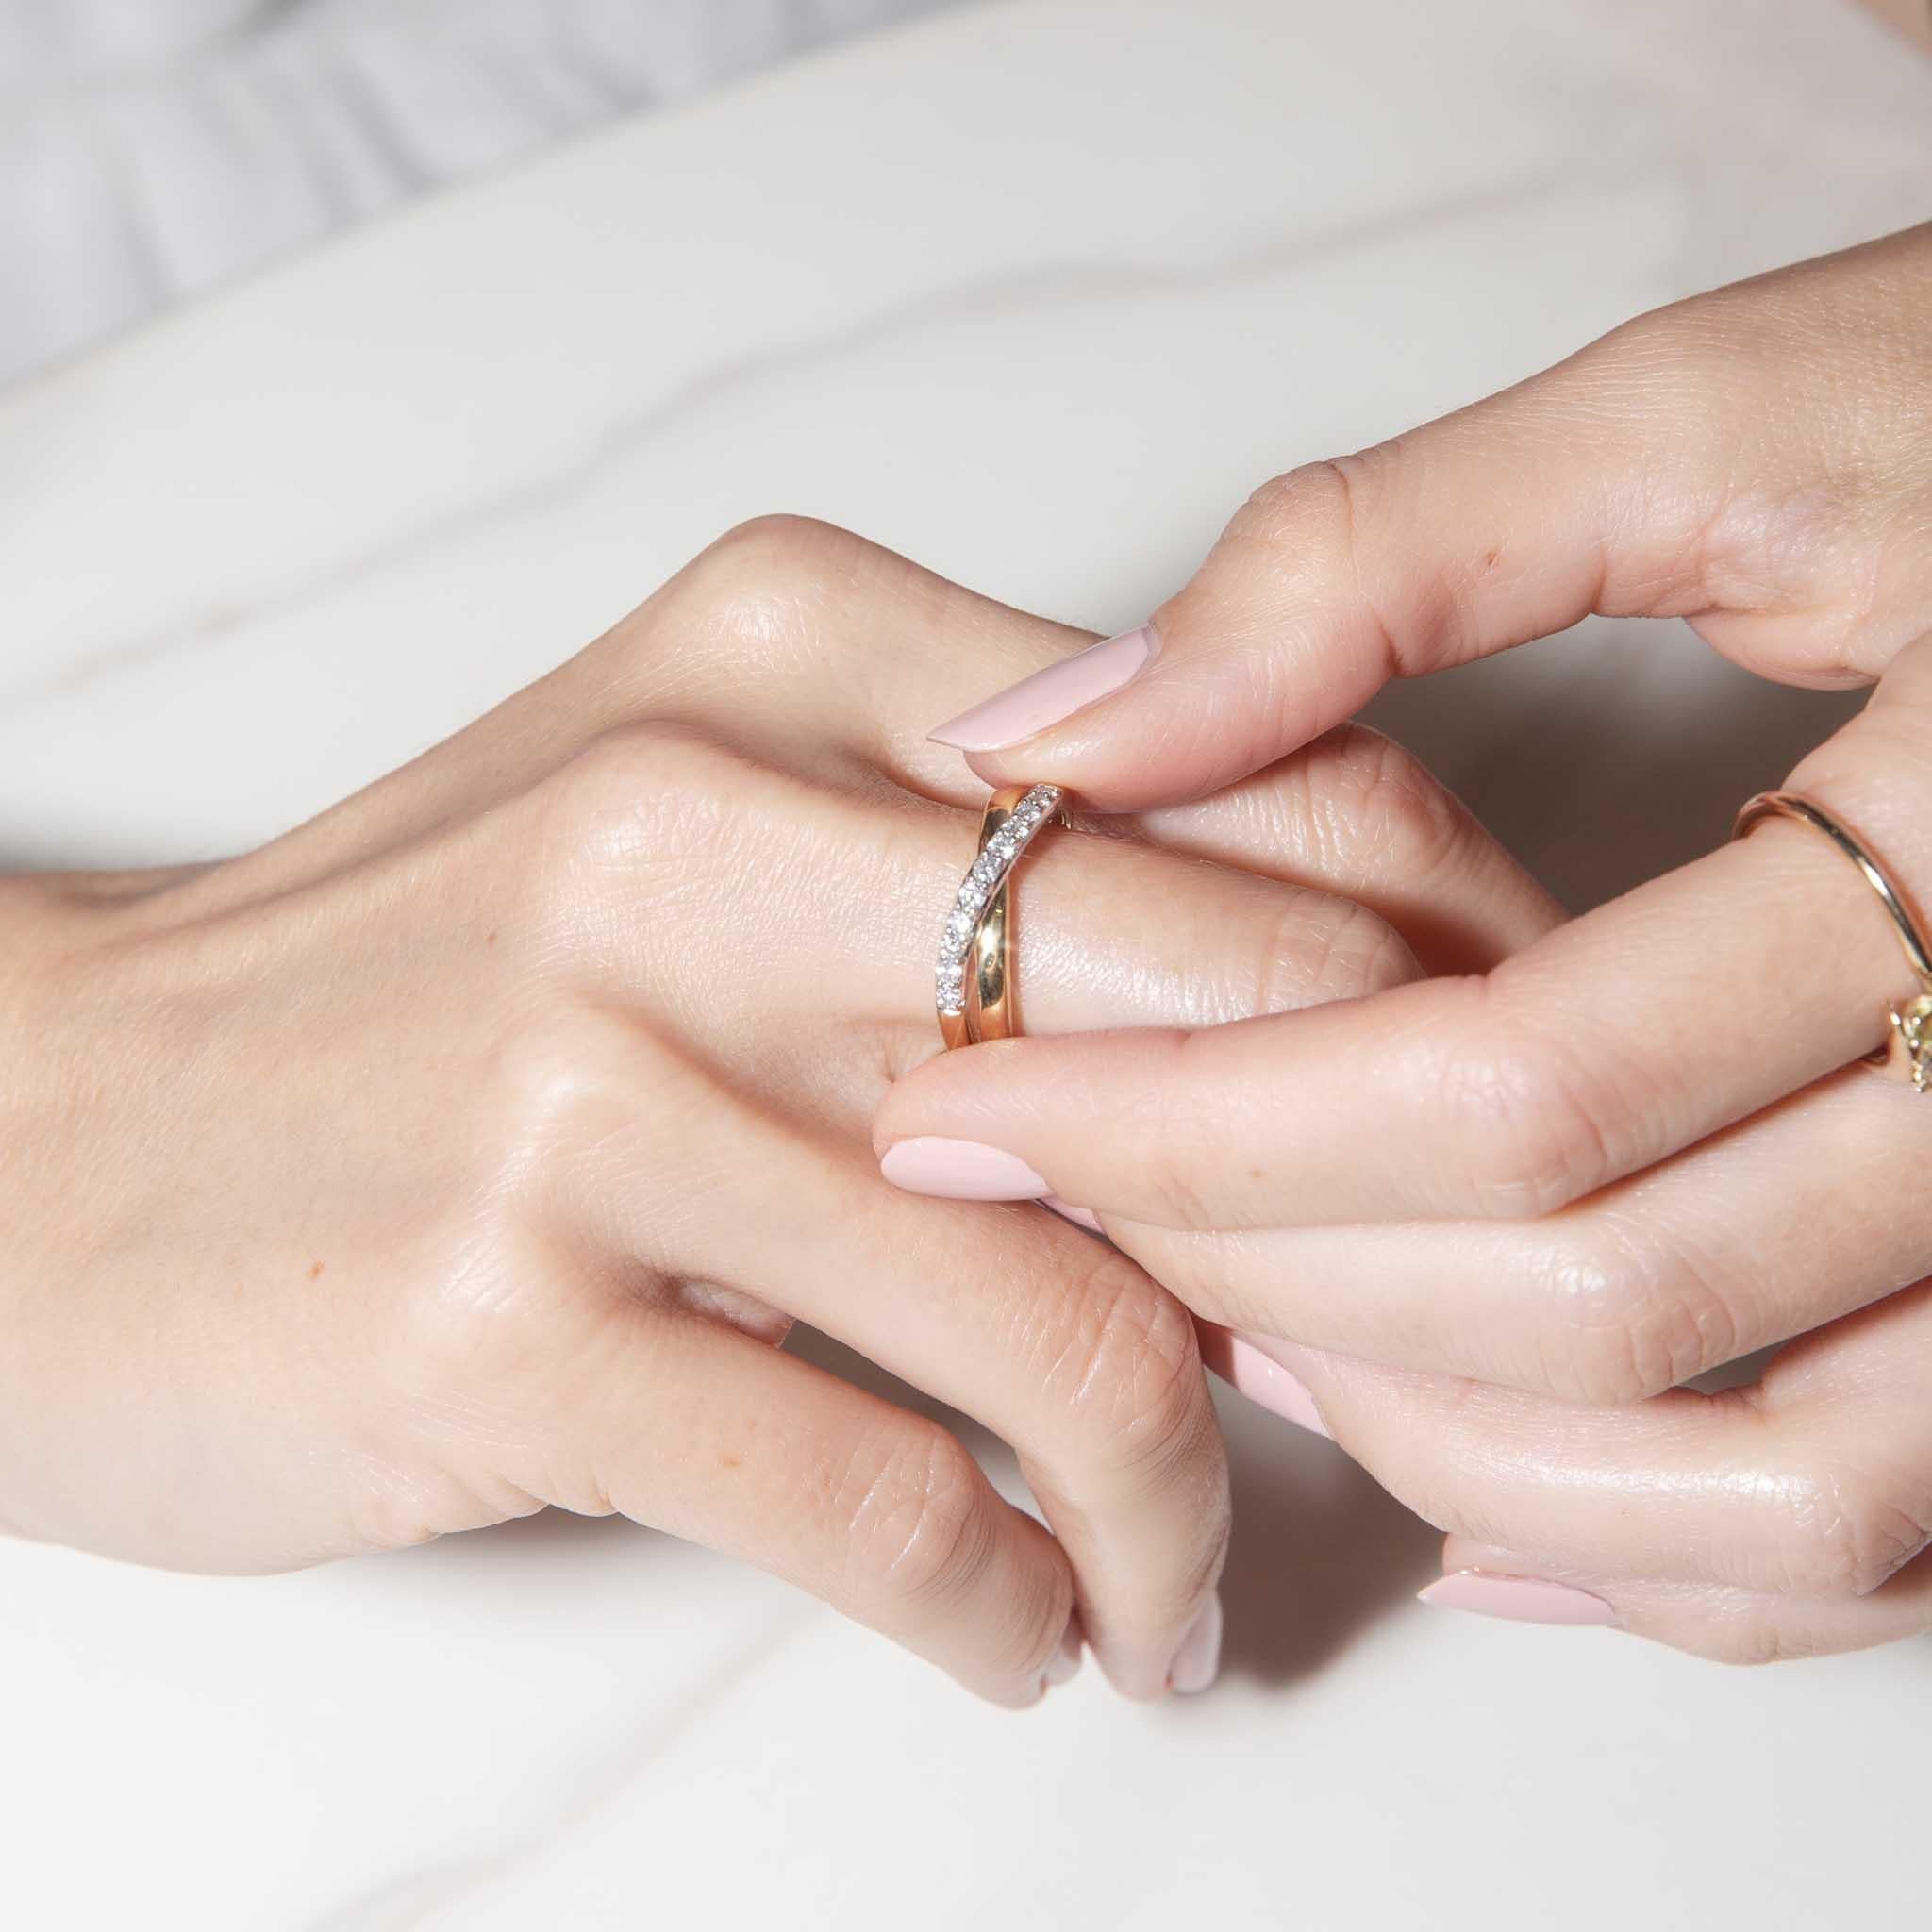 Symbolising the union of two people and everlasting love, The Kassandra Ring is perfect for your someone special.  Crafted in 18 carat gold with ribbons of diamond and gold crossed, she is all gentle curves and sparkle.

The Kassandra Ring Gem